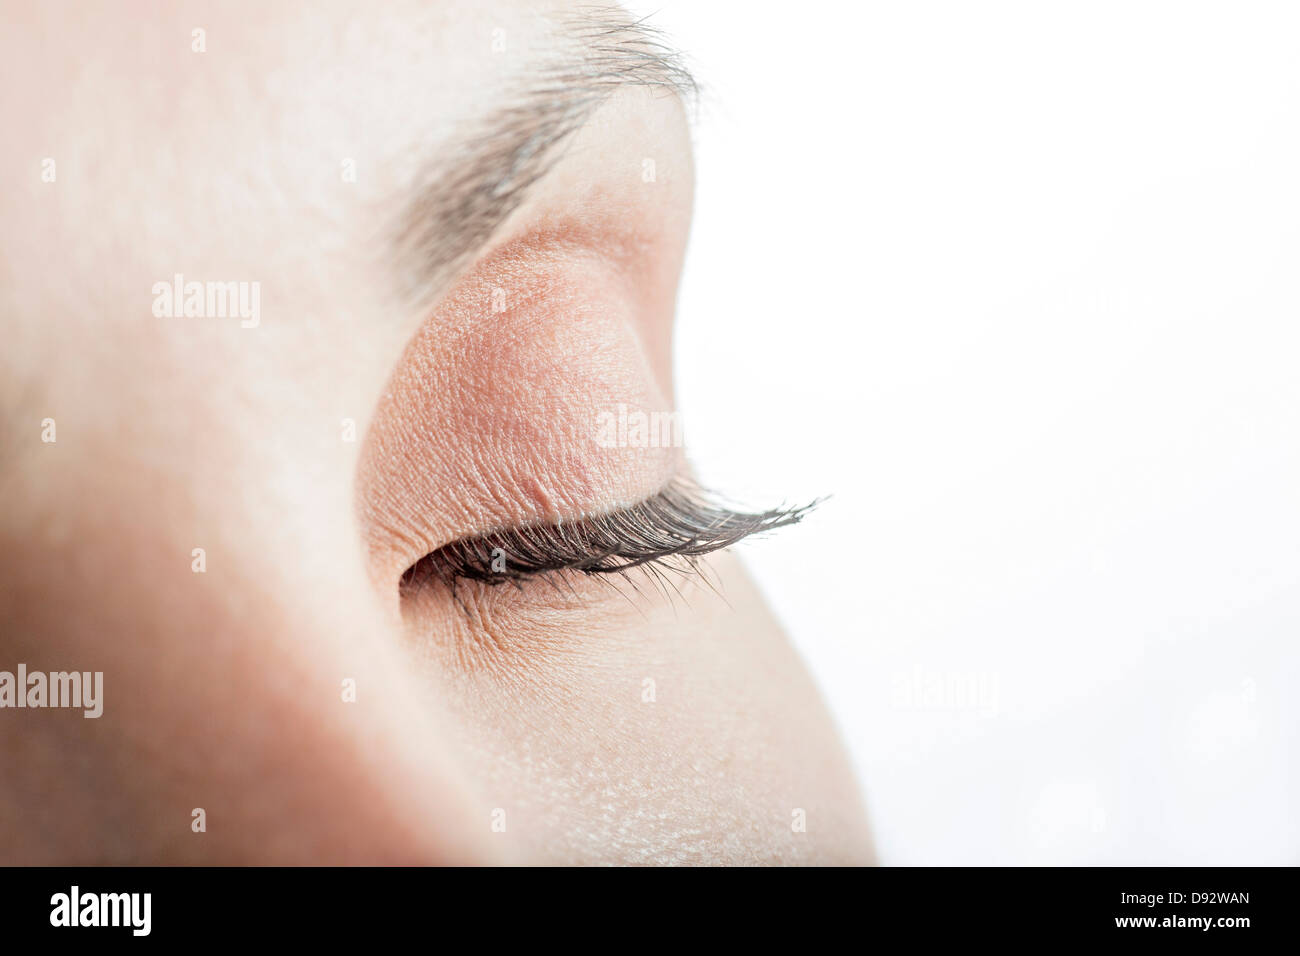 Close up of woman's closed eye Stock Photo